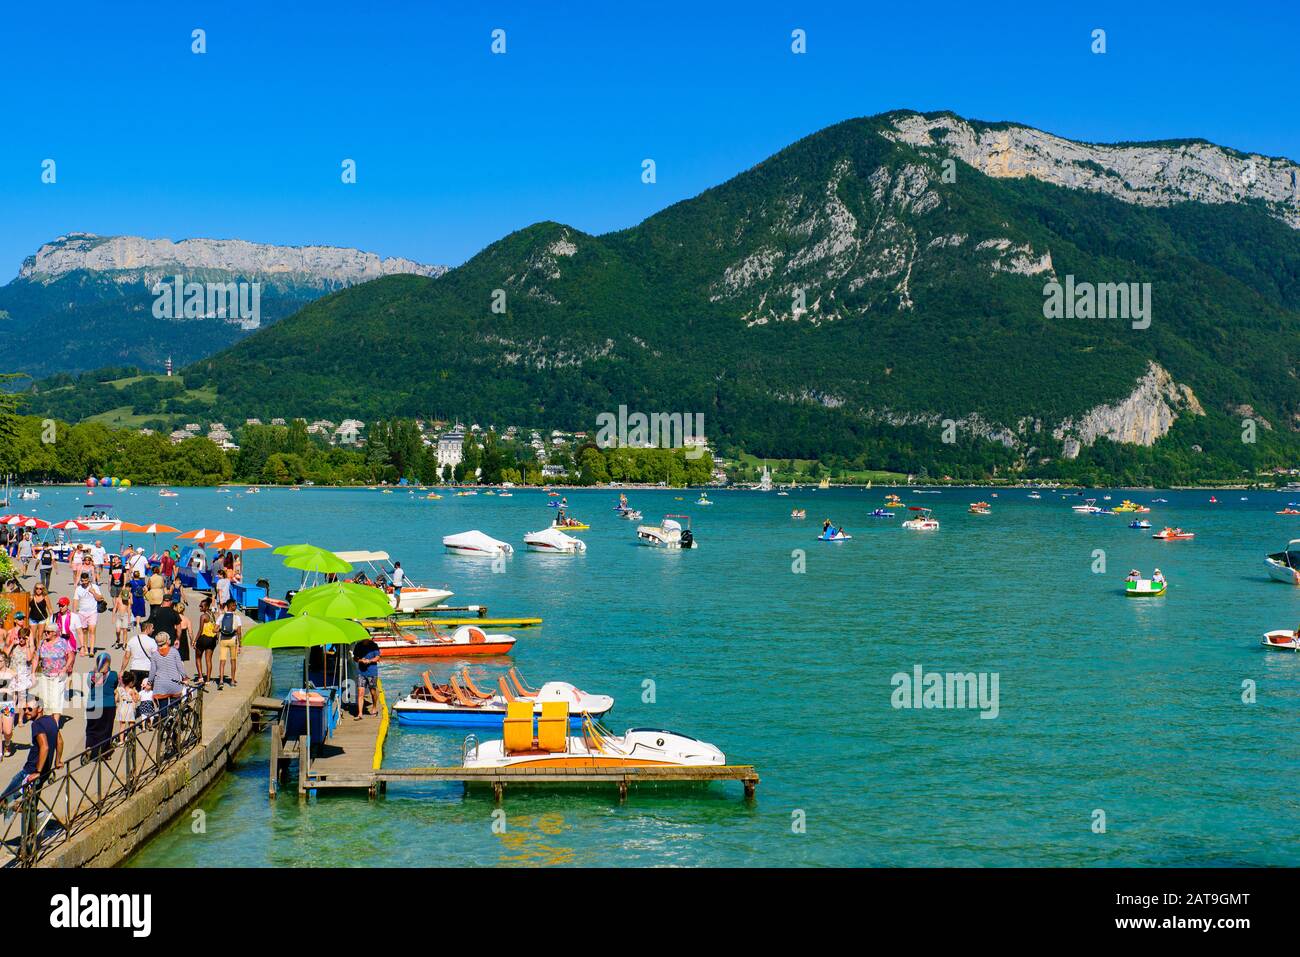 People having fun on Lake Annecy, Europe's cleanest lake, in Haute-Savoie department, France Stock Photo